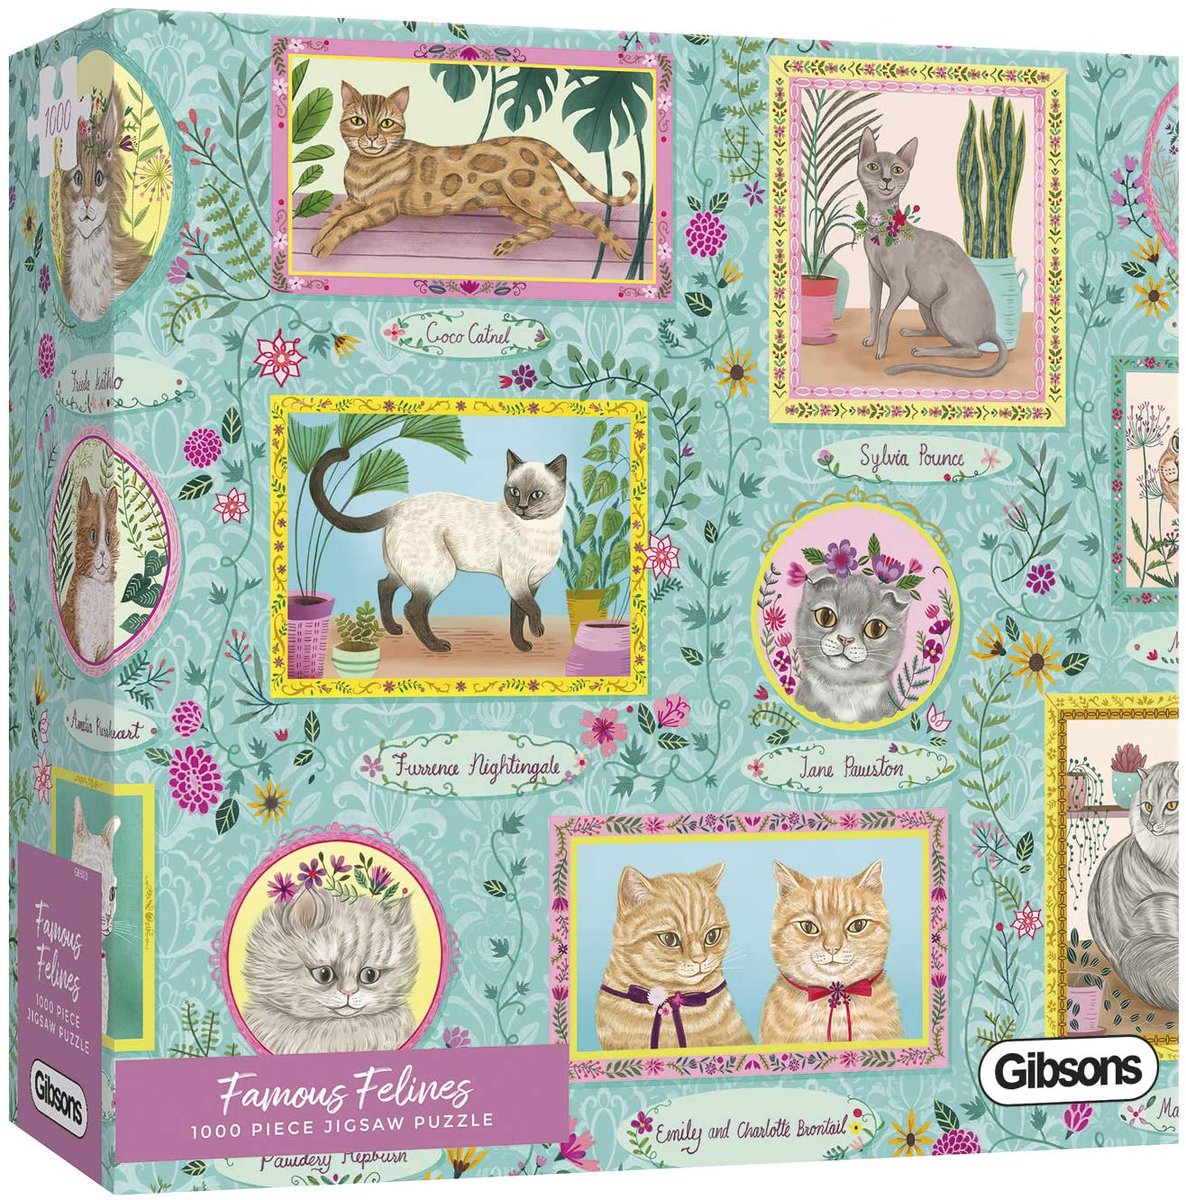 Our clear Puzzle MVP this week is Lisa/Lance, with several great action shots, a completed border, and several floating islands.She's working on the 1000 piece puzzle Famous Felines by  @Gibsons_puzzles:  https://amzn.to/2QPkyzu  (aflink) @lisa_delcampo  @CircleNetflix